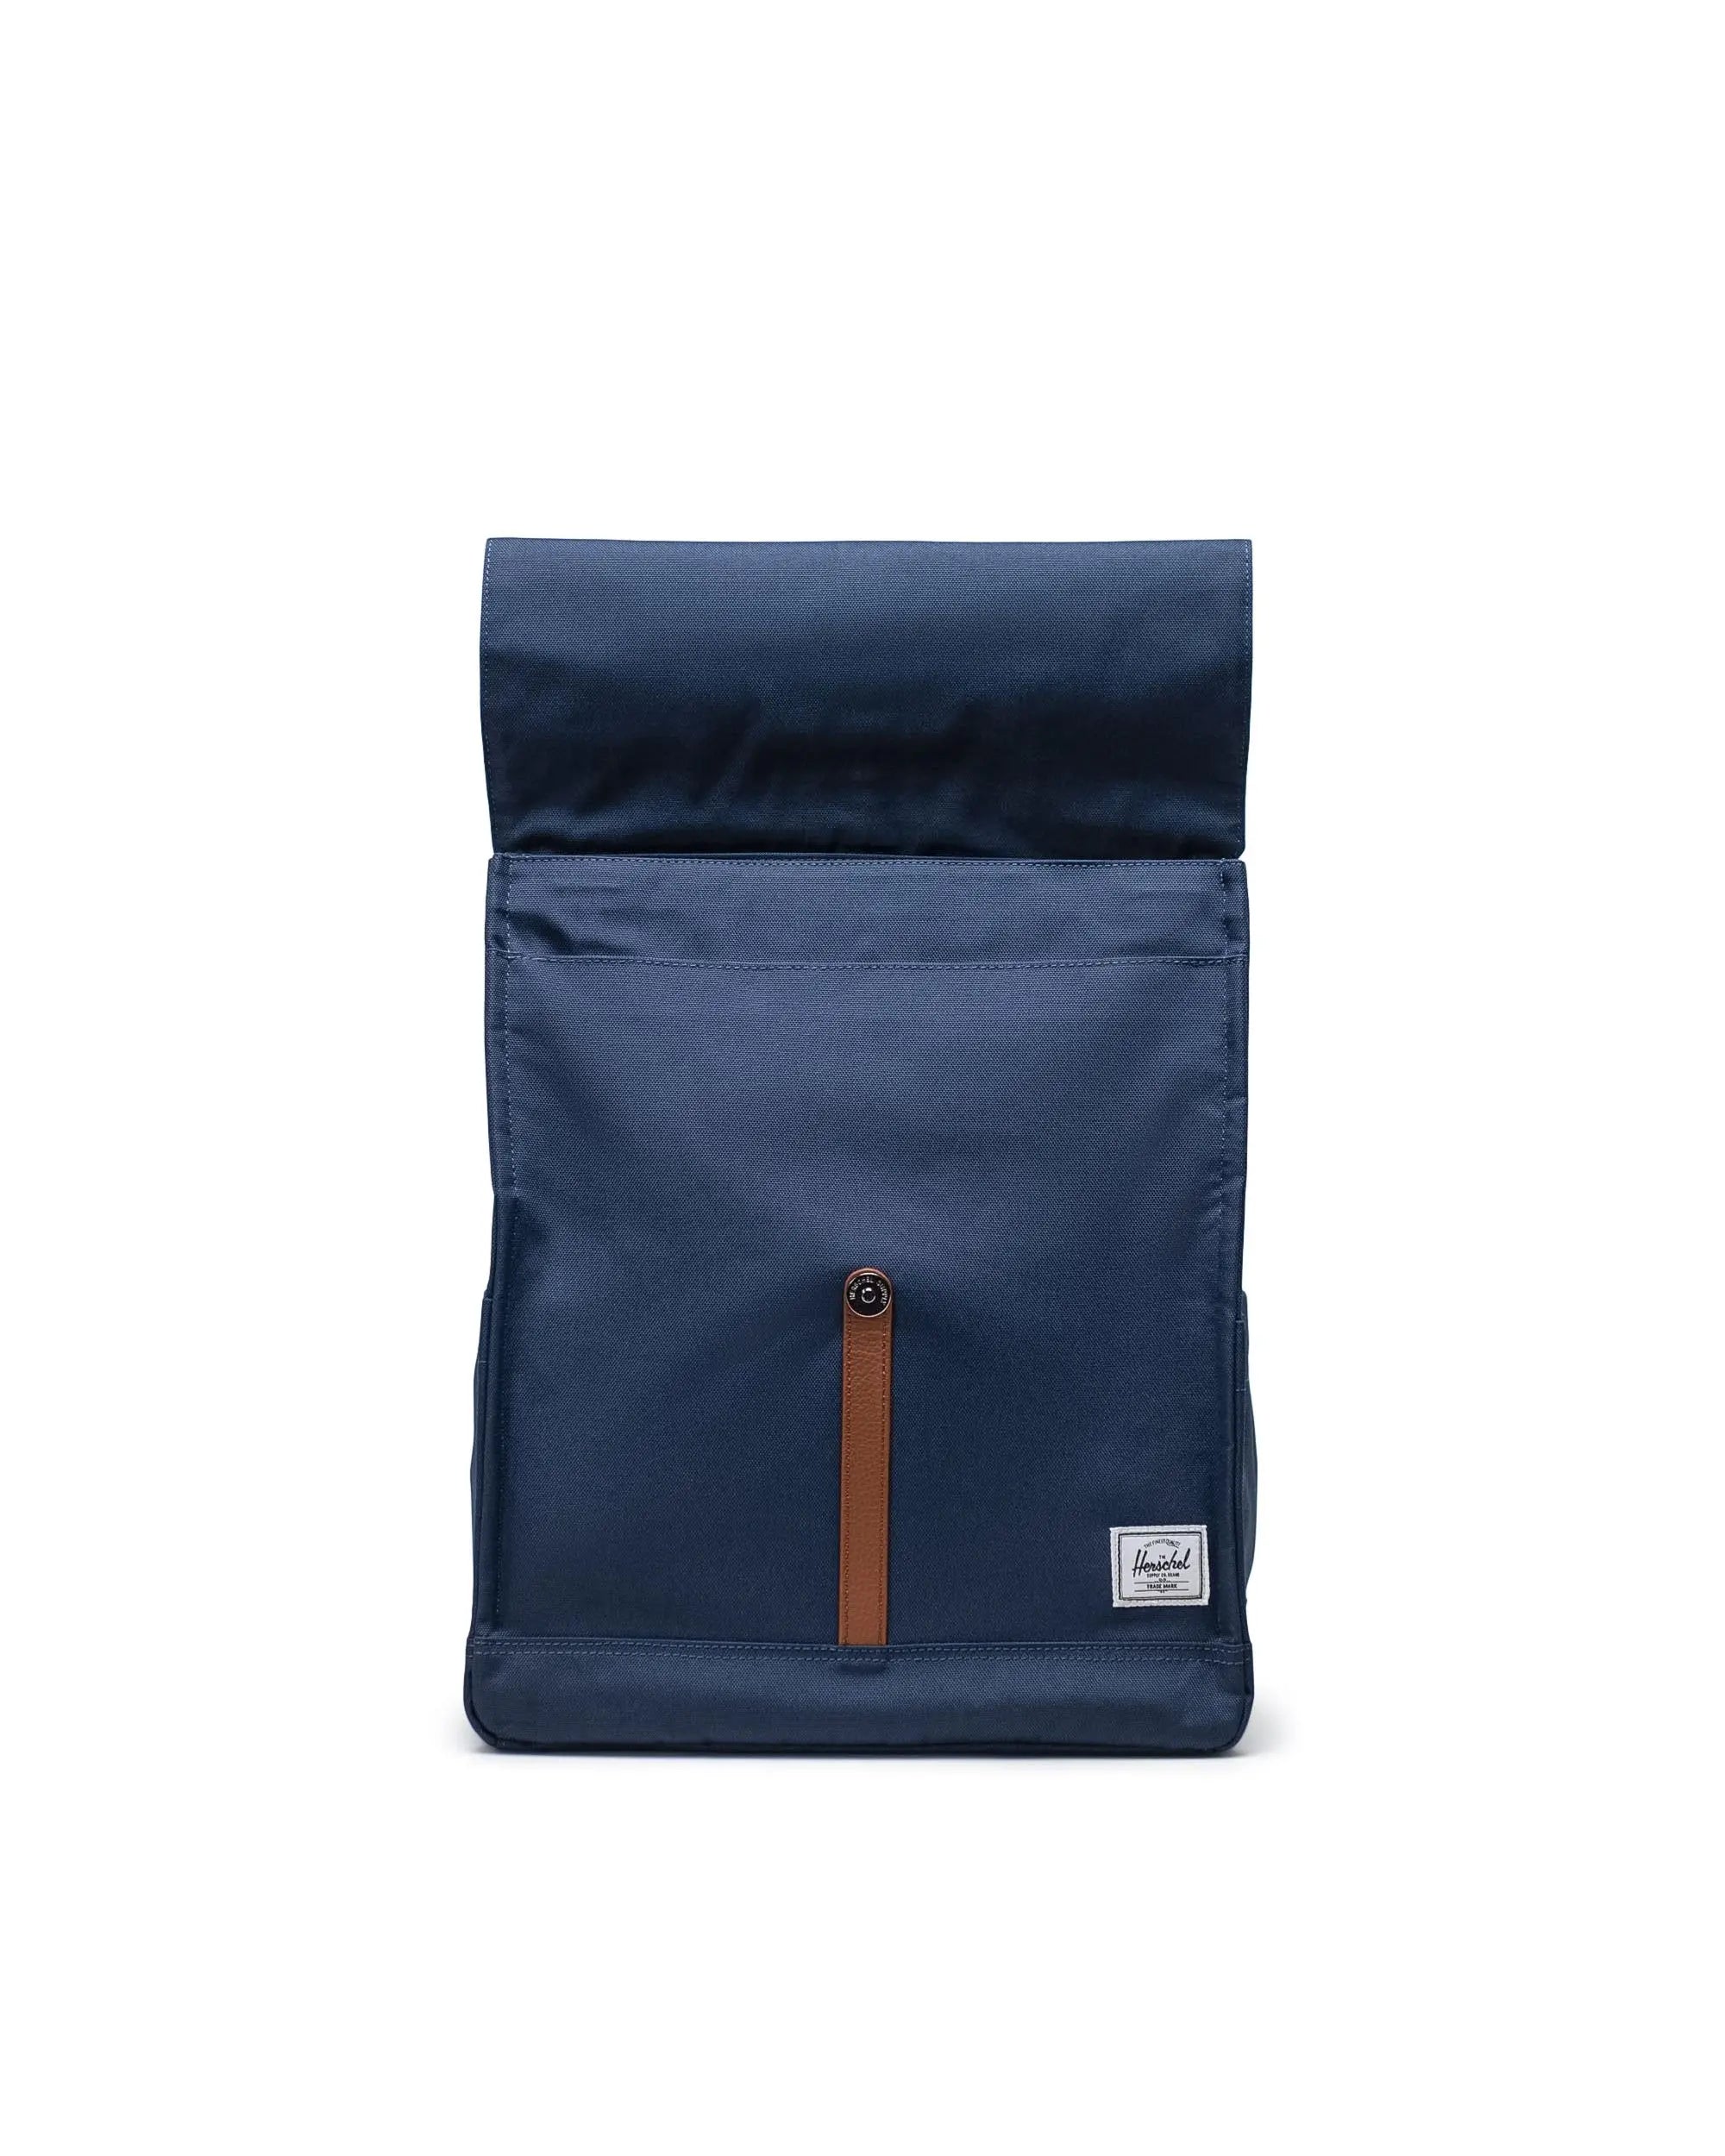 City Backpack - NAVY-00007